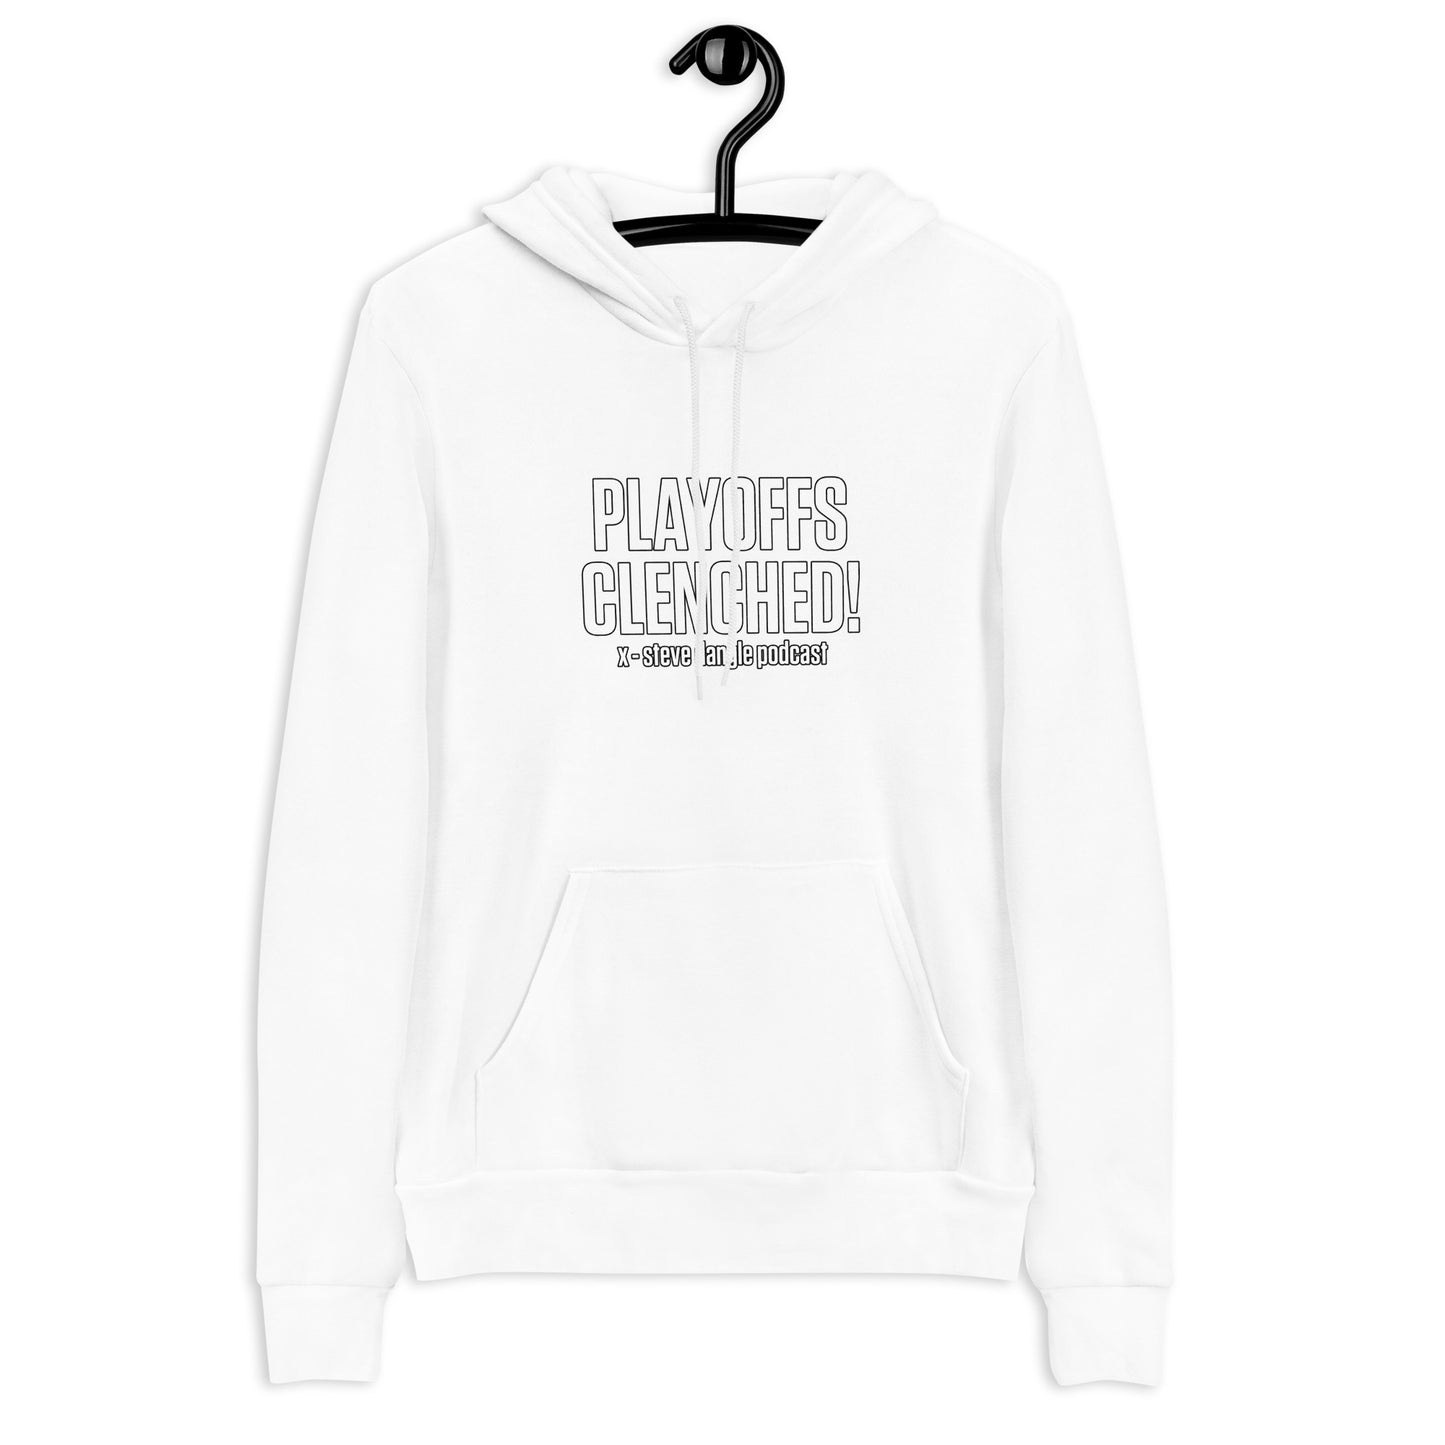 Playoffs Clenched Hoodie